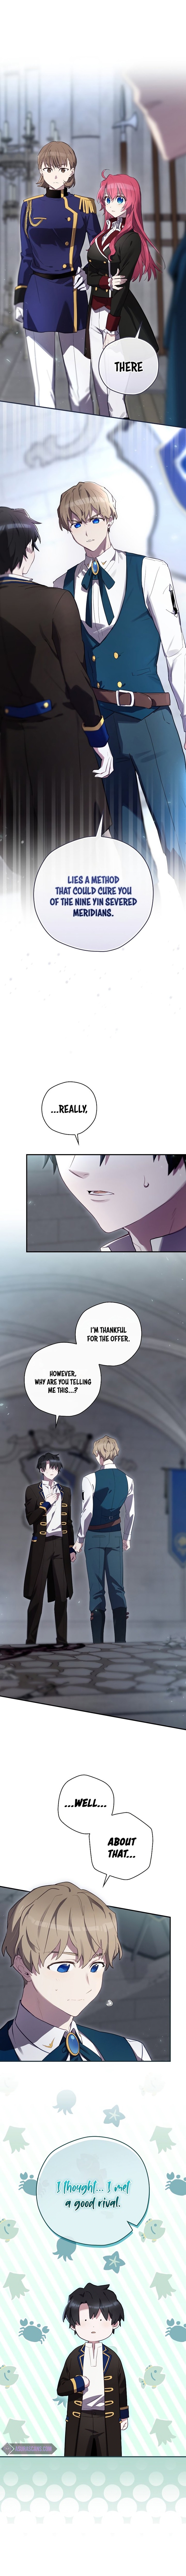 Ending Maker Chapter 35 Page 1